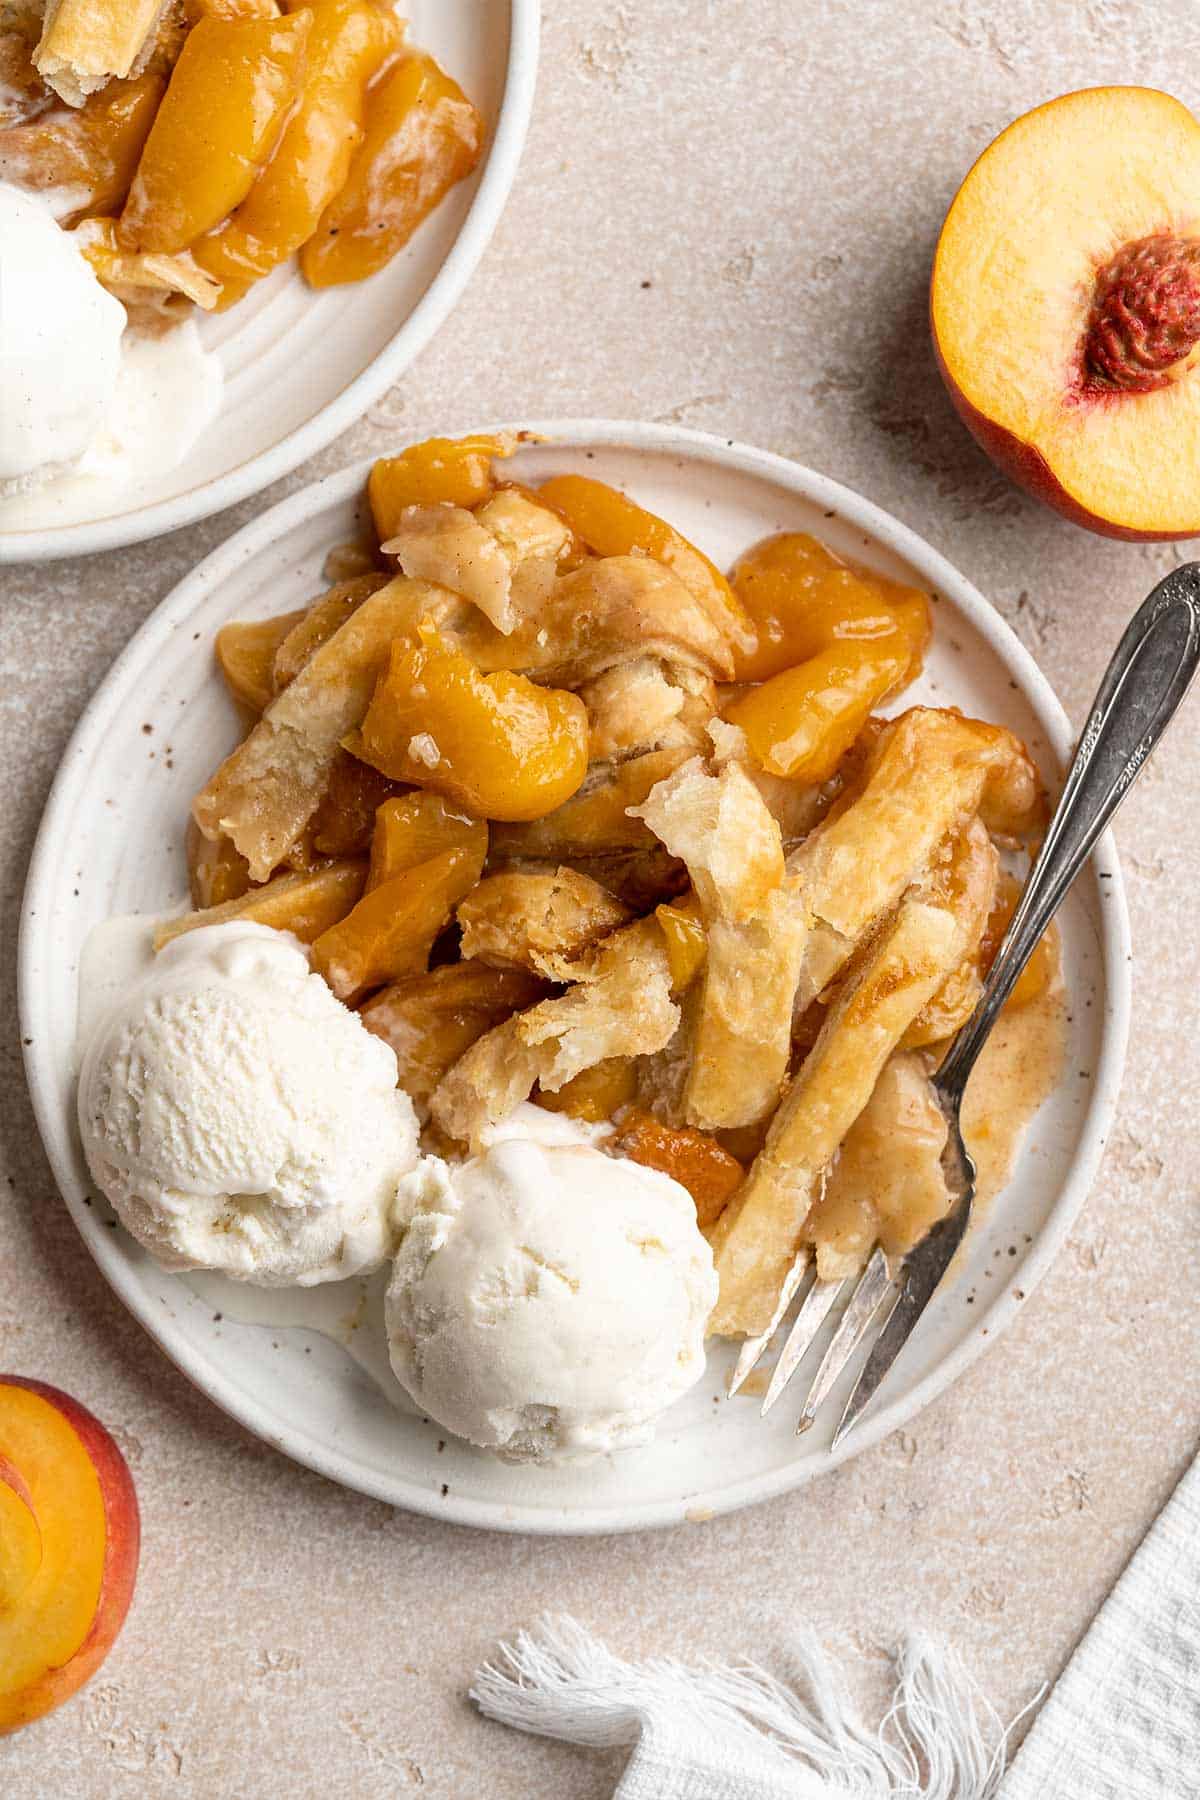 Southern-style cobbler featuring canned and fresh peaches served in a large white cooking dish.